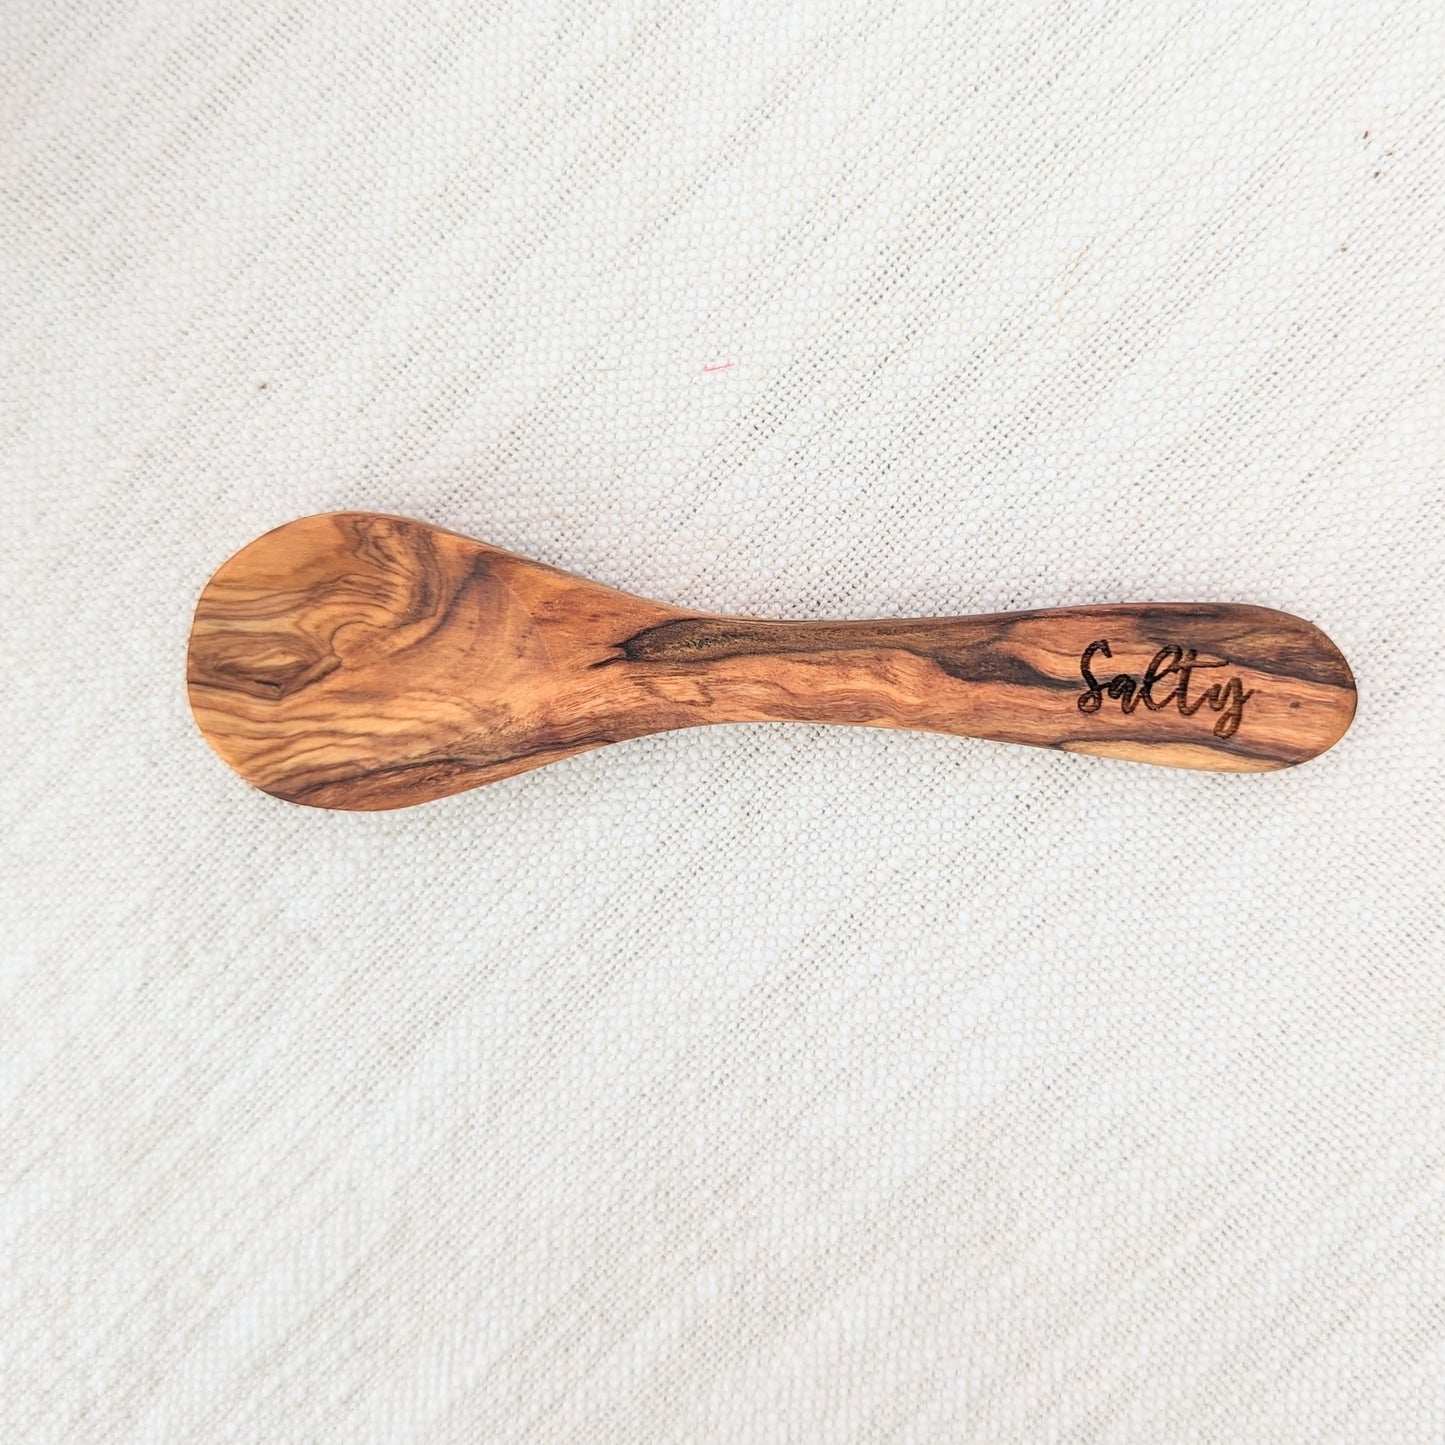 5" Olive Spoon